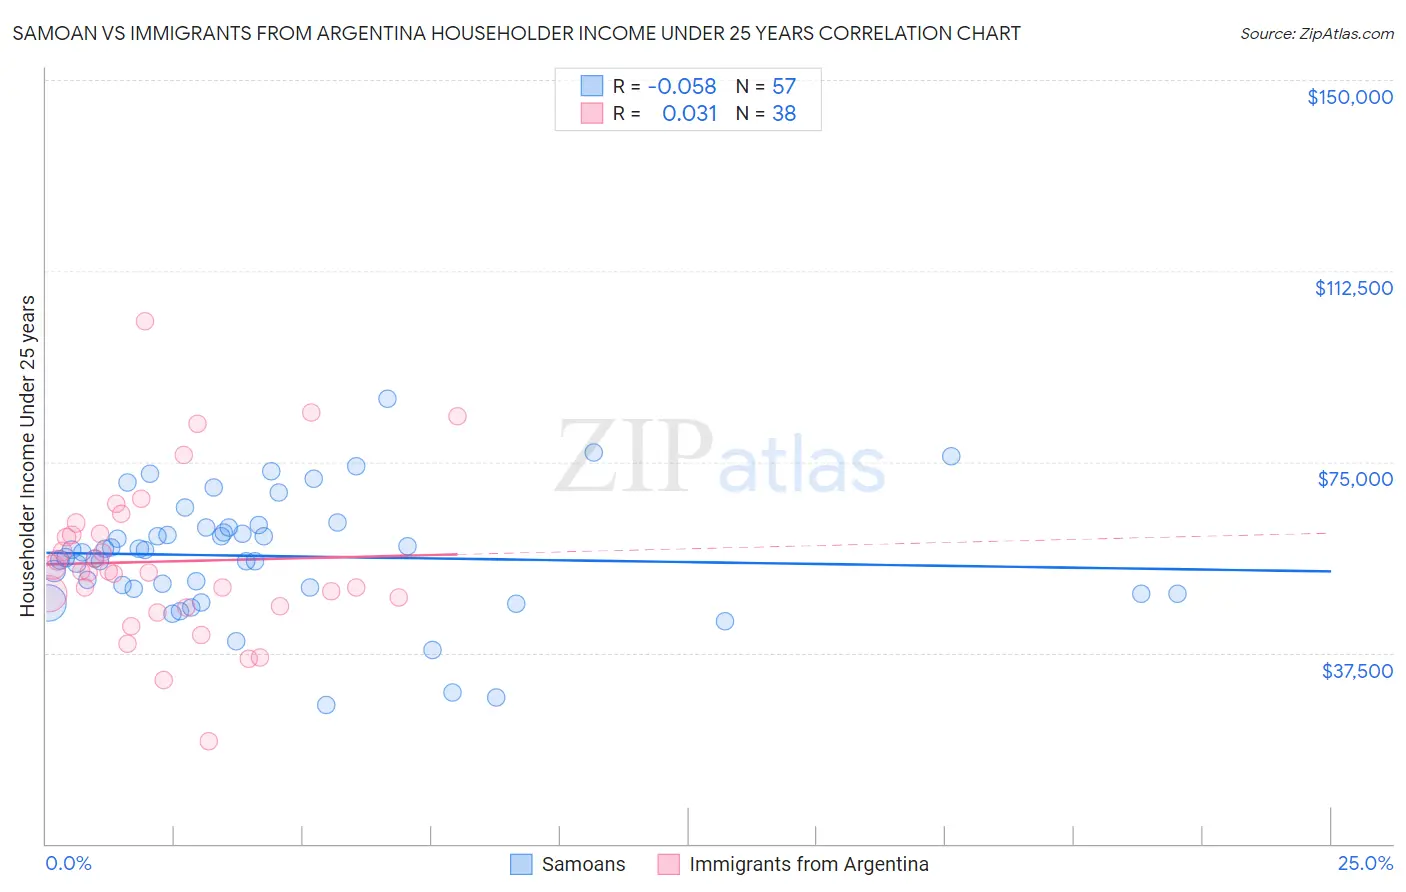 Samoan vs Immigrants from Argentina Householder Income Under 25 years